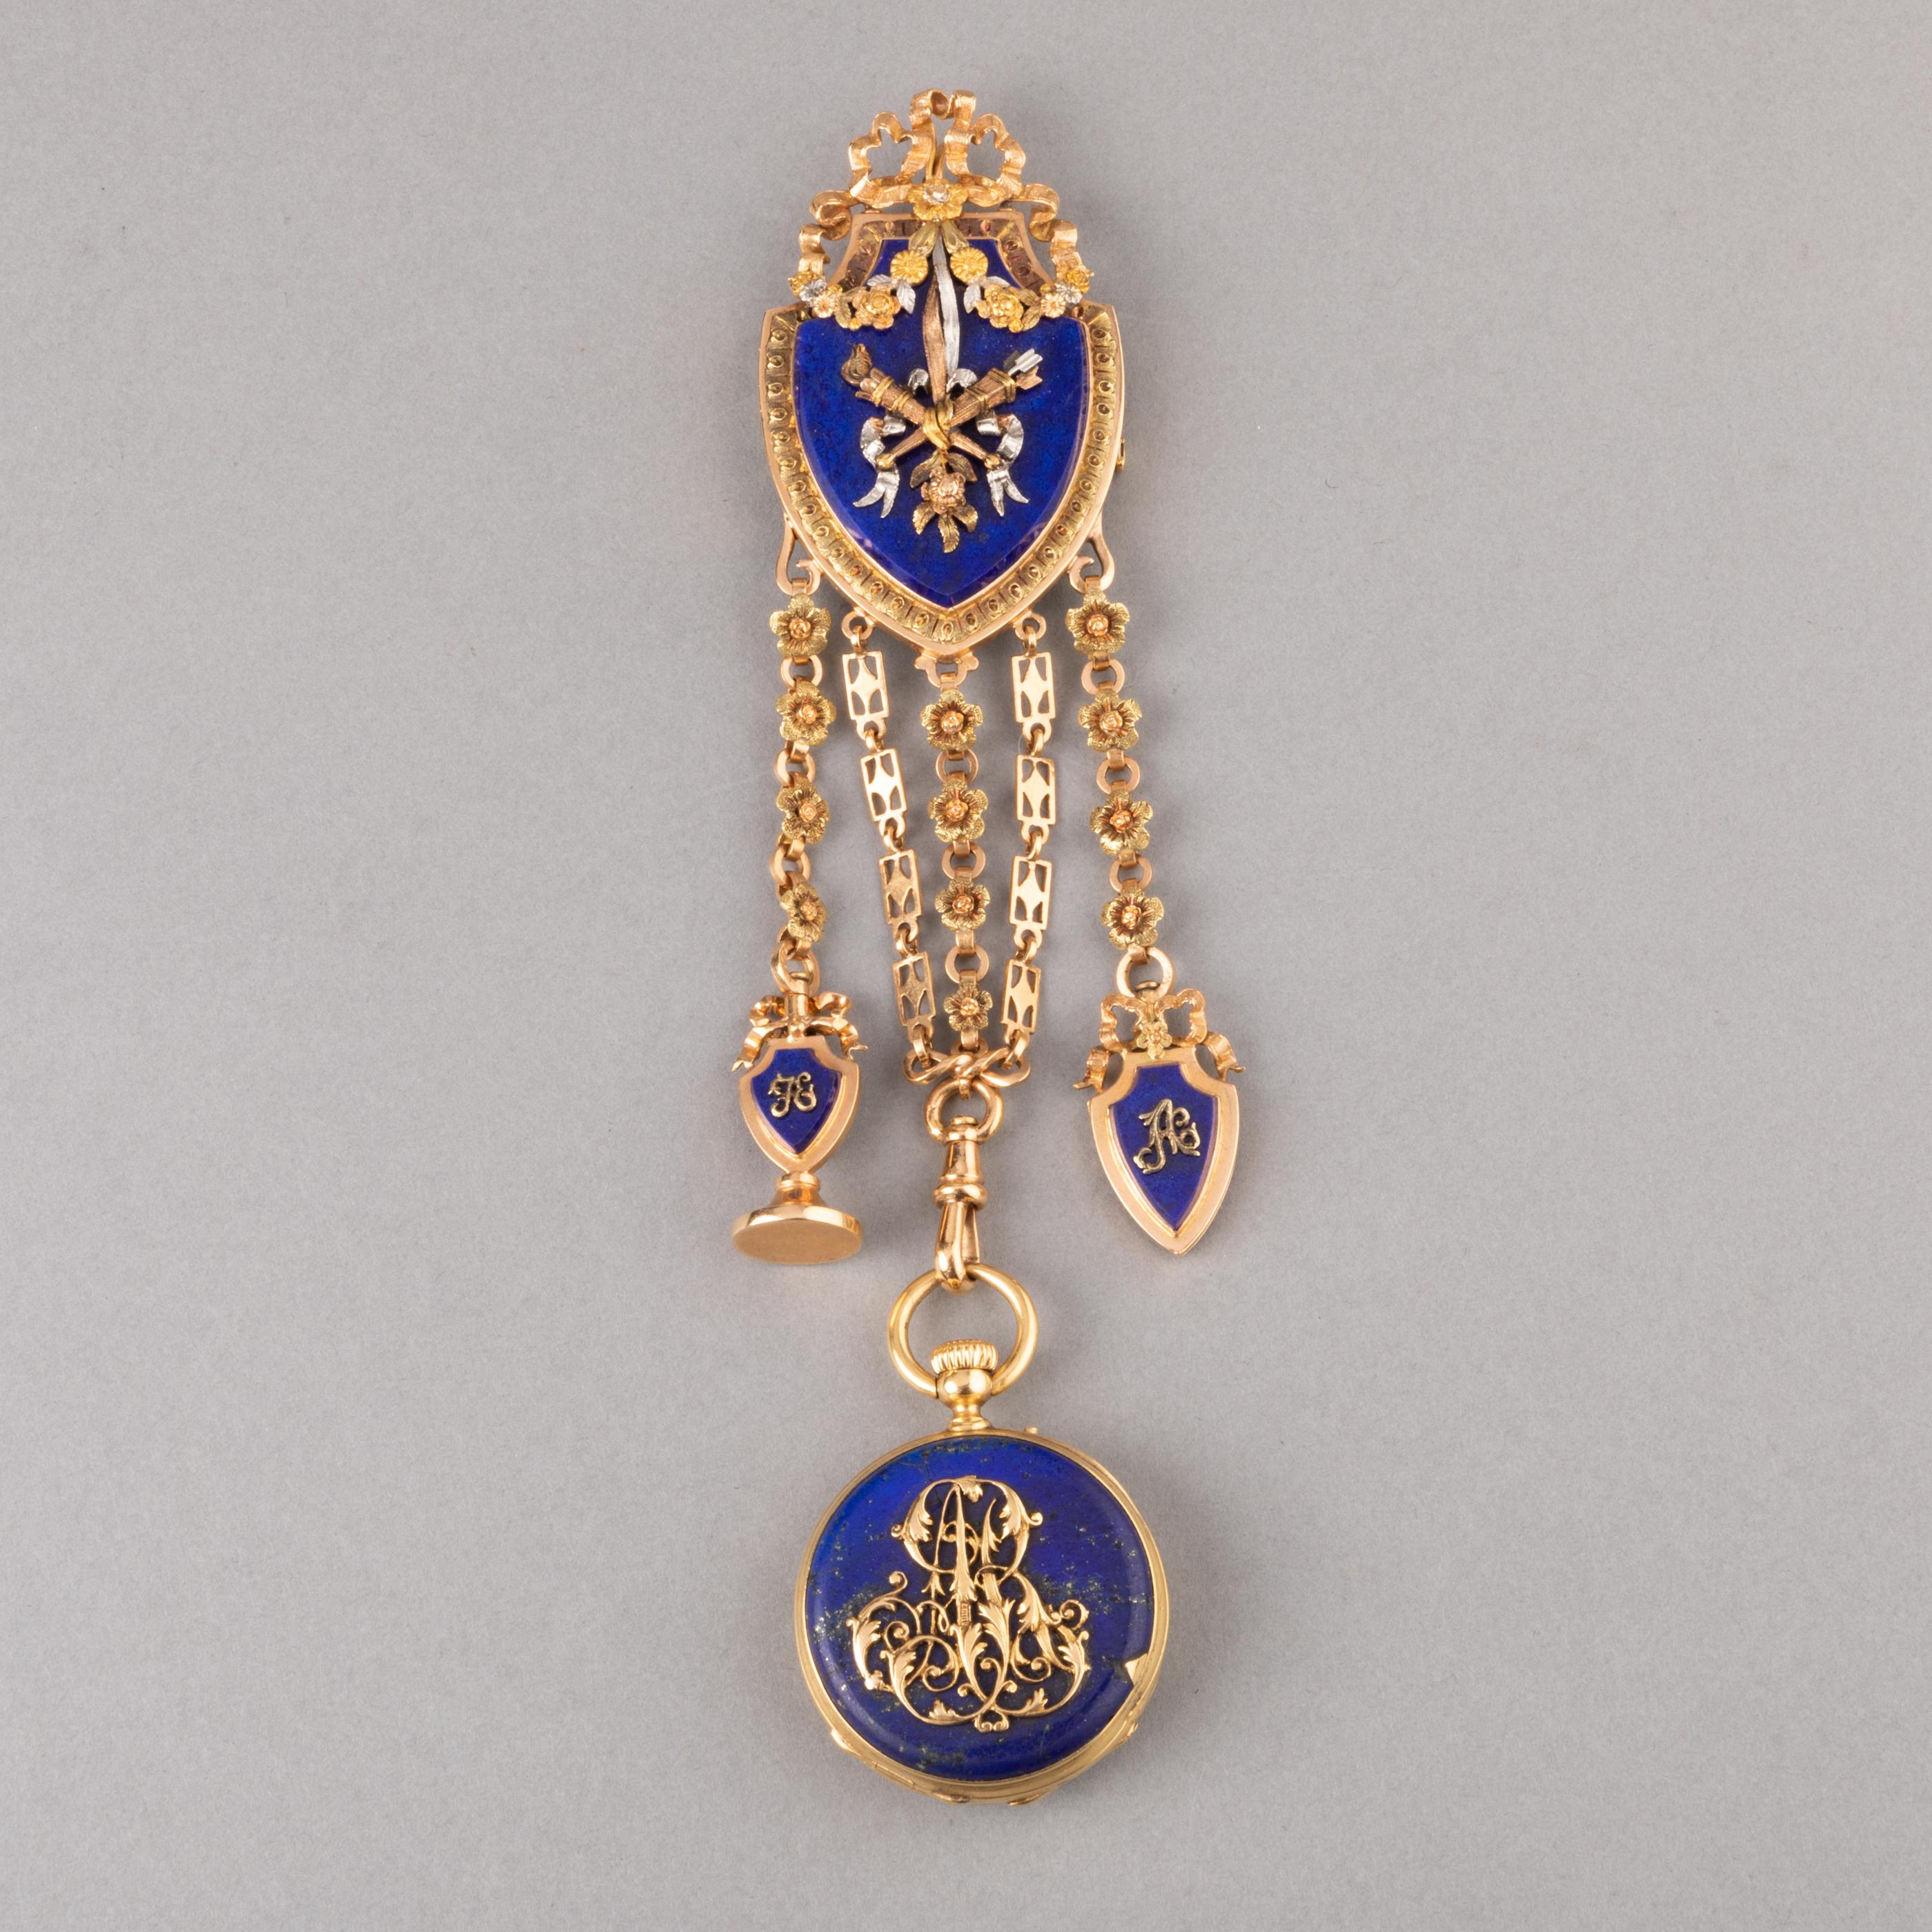 Gold and Lapis Lazuli Antique Châtelaine Watch by Le Roy & Fils Paris

Very beautiful Châtelaine, made by French maker Le Roy & Fils circa 1850, Napoleon III era.
The house was created in 1785, it became Leroy & Fils in 1828 until 1889, after that